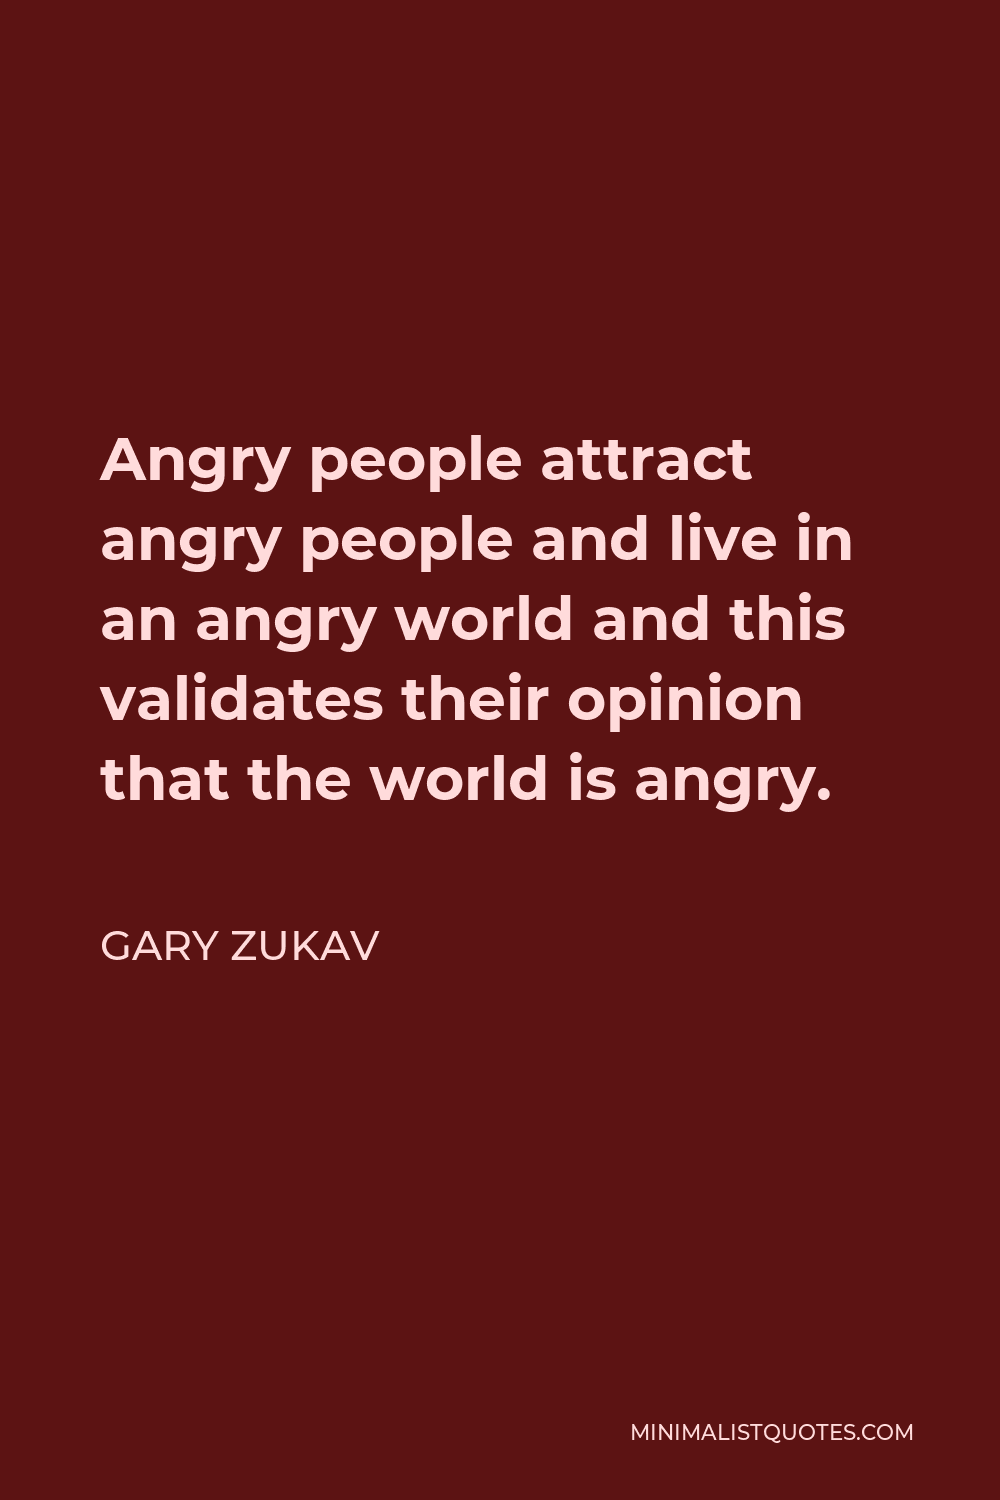 Gary Zukav Quote - Angry people attract angry people and live in an angry world and this validates their opinion that the world is angry.